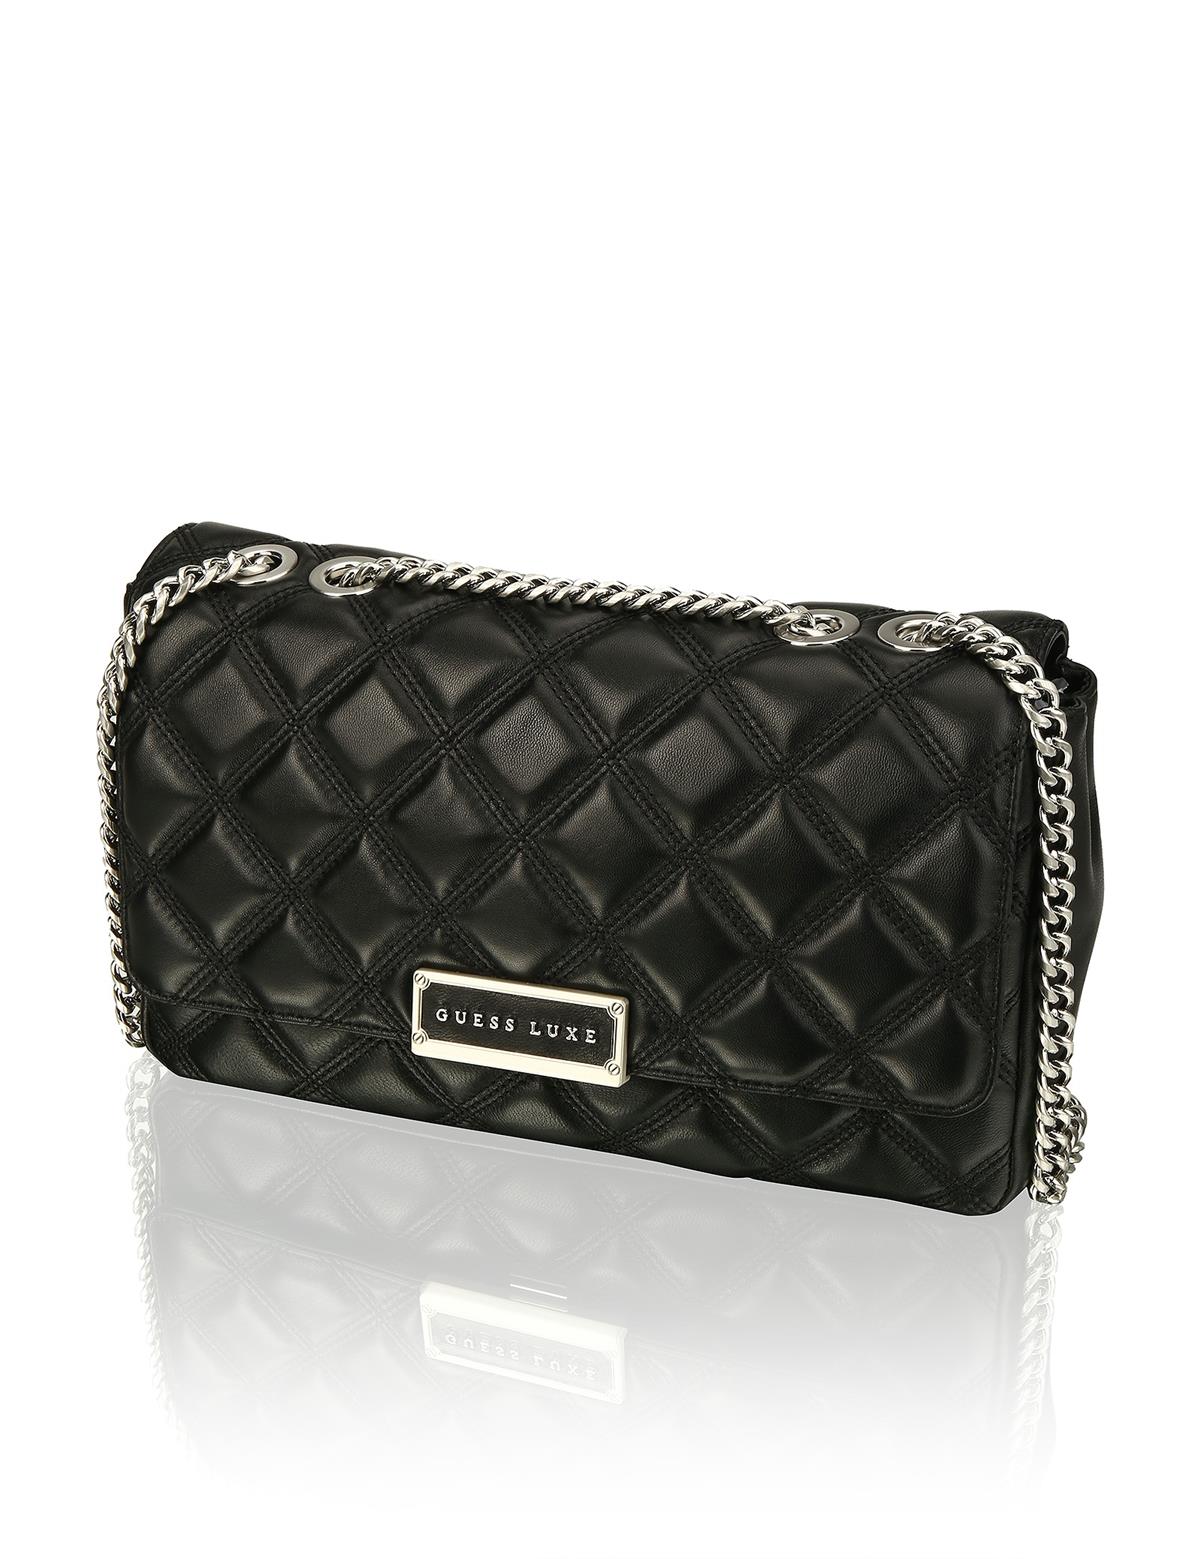 HUMANIC 23 Guess Luxe Glattleder Quilted Bag EUR 185 6131001740